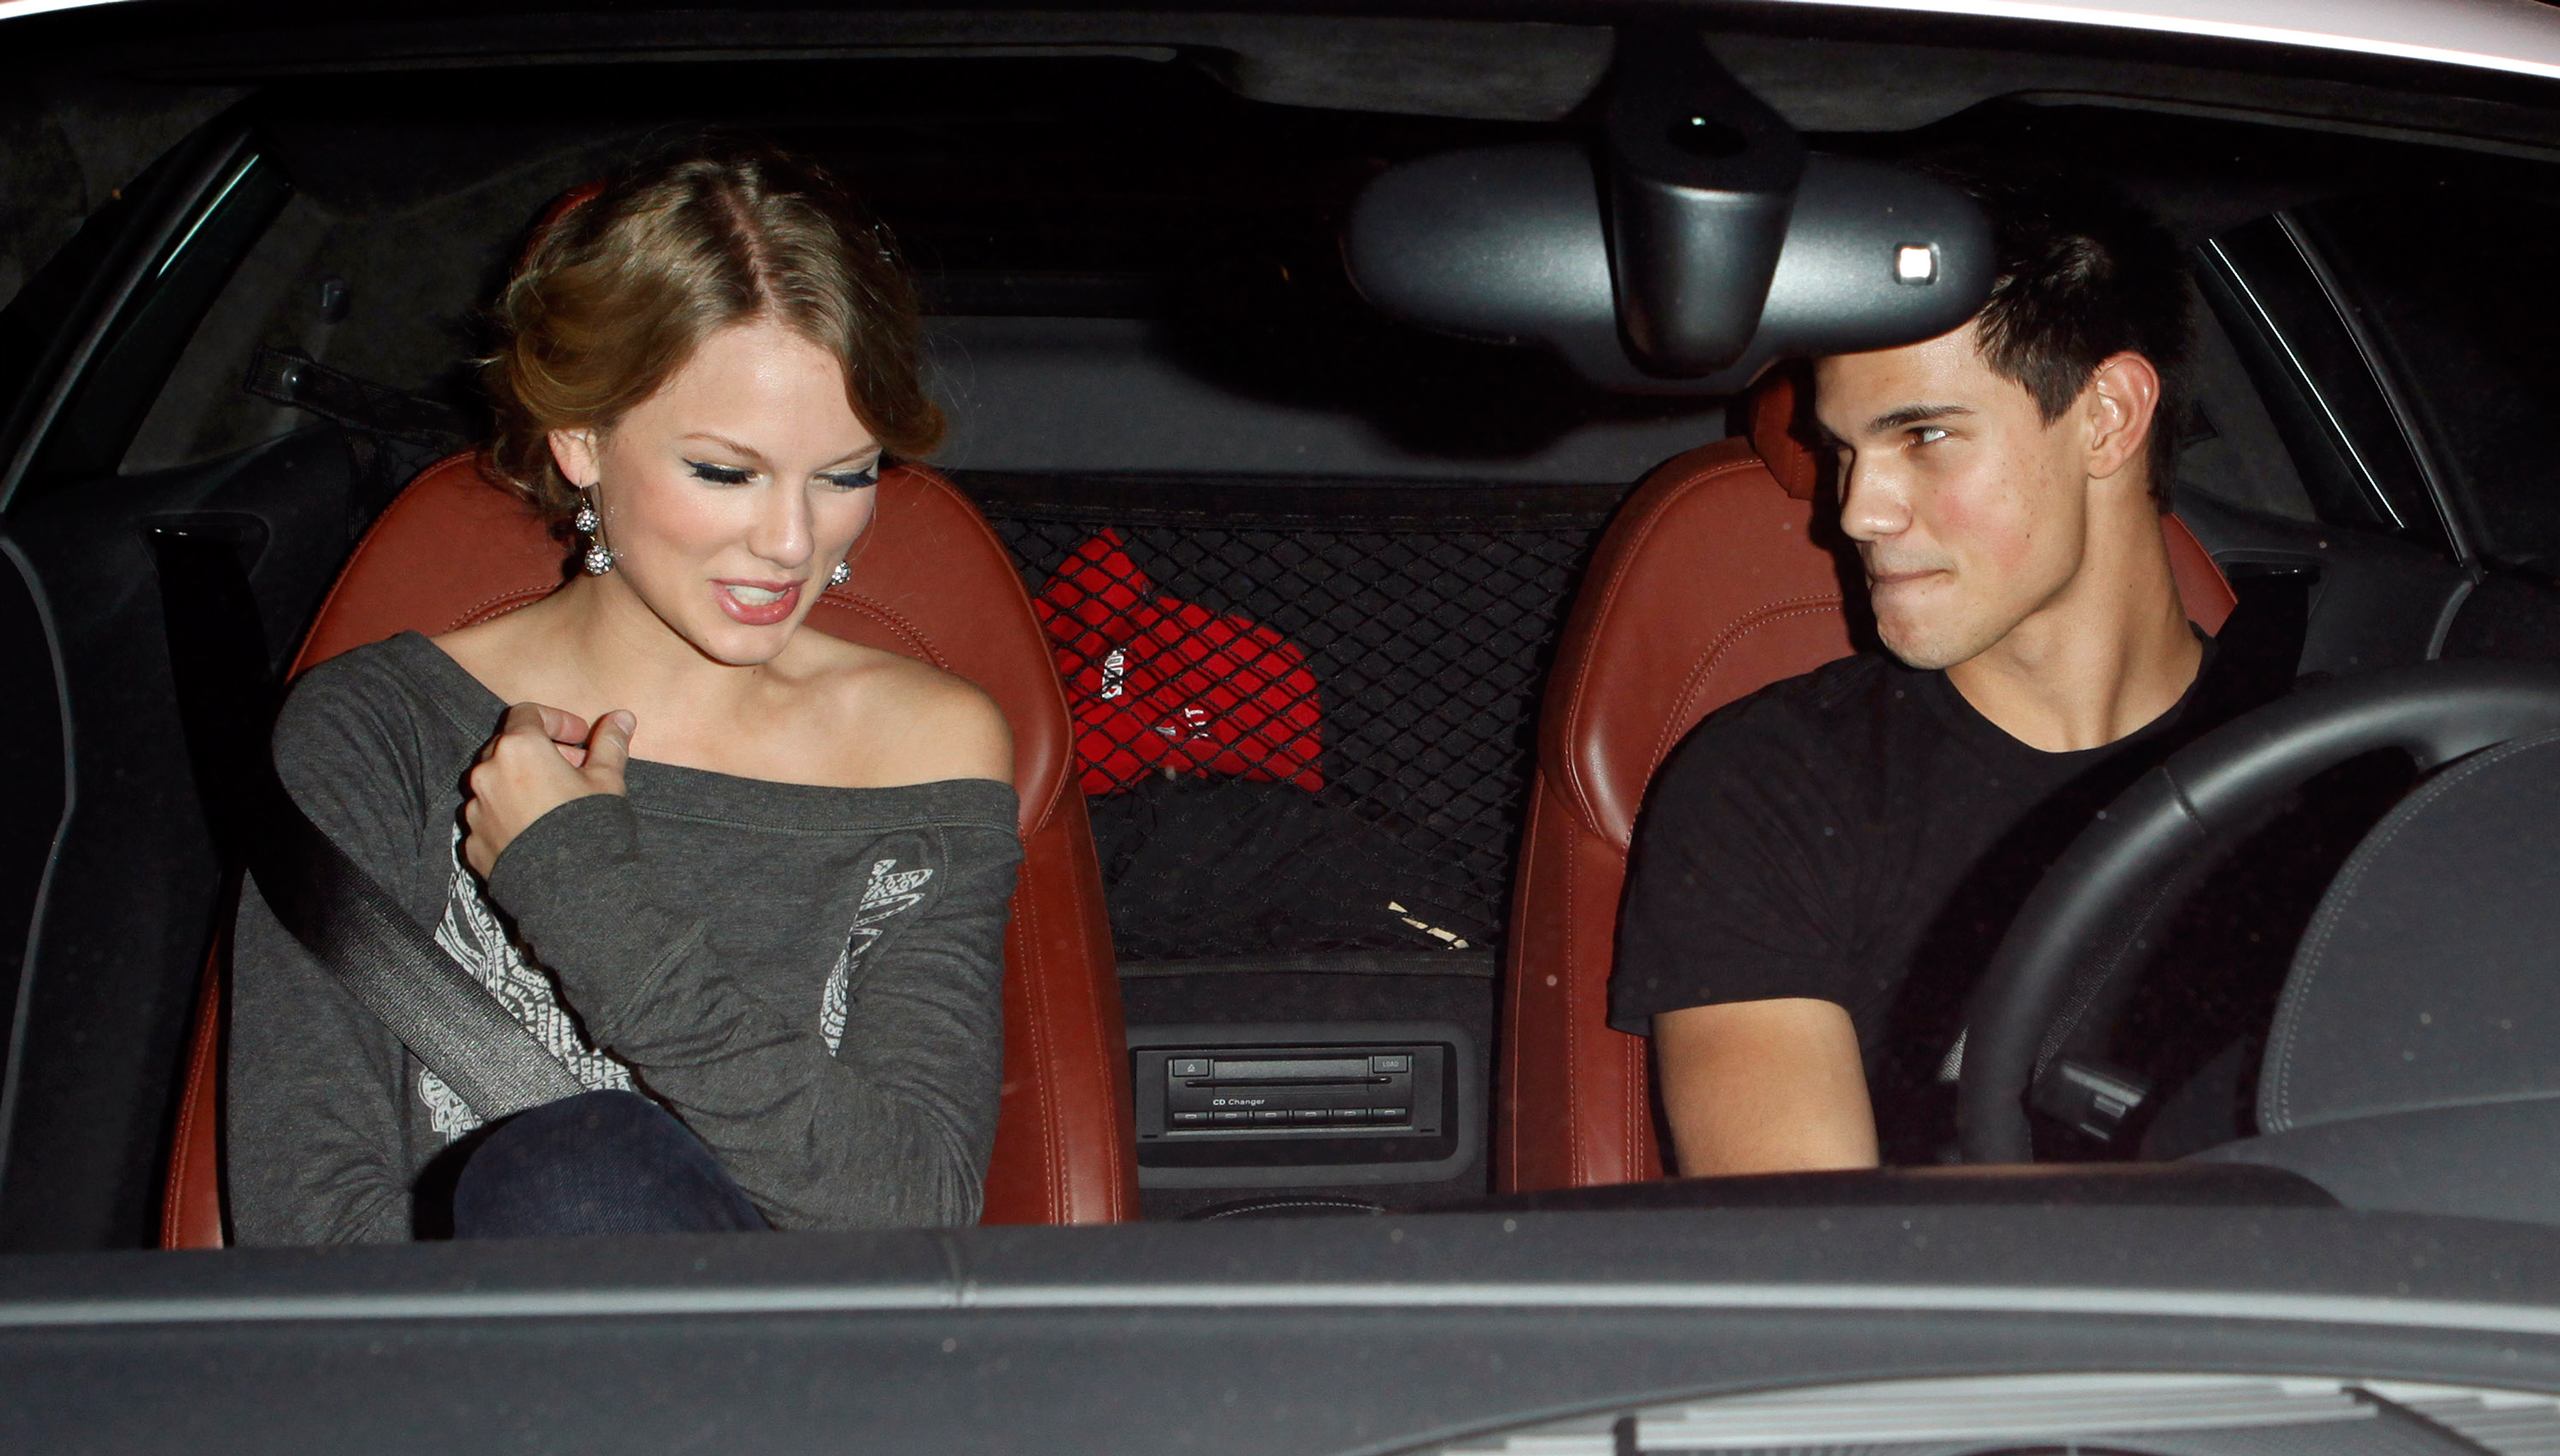 Taylor Swift and Taylor Lautner sighting at the Alice+Olivia Boutique on Robertson Blvd. in Los Angeles on Oct. 28, 2009. (Jean Baptiste Lacroix—WireImage/Getty Images)